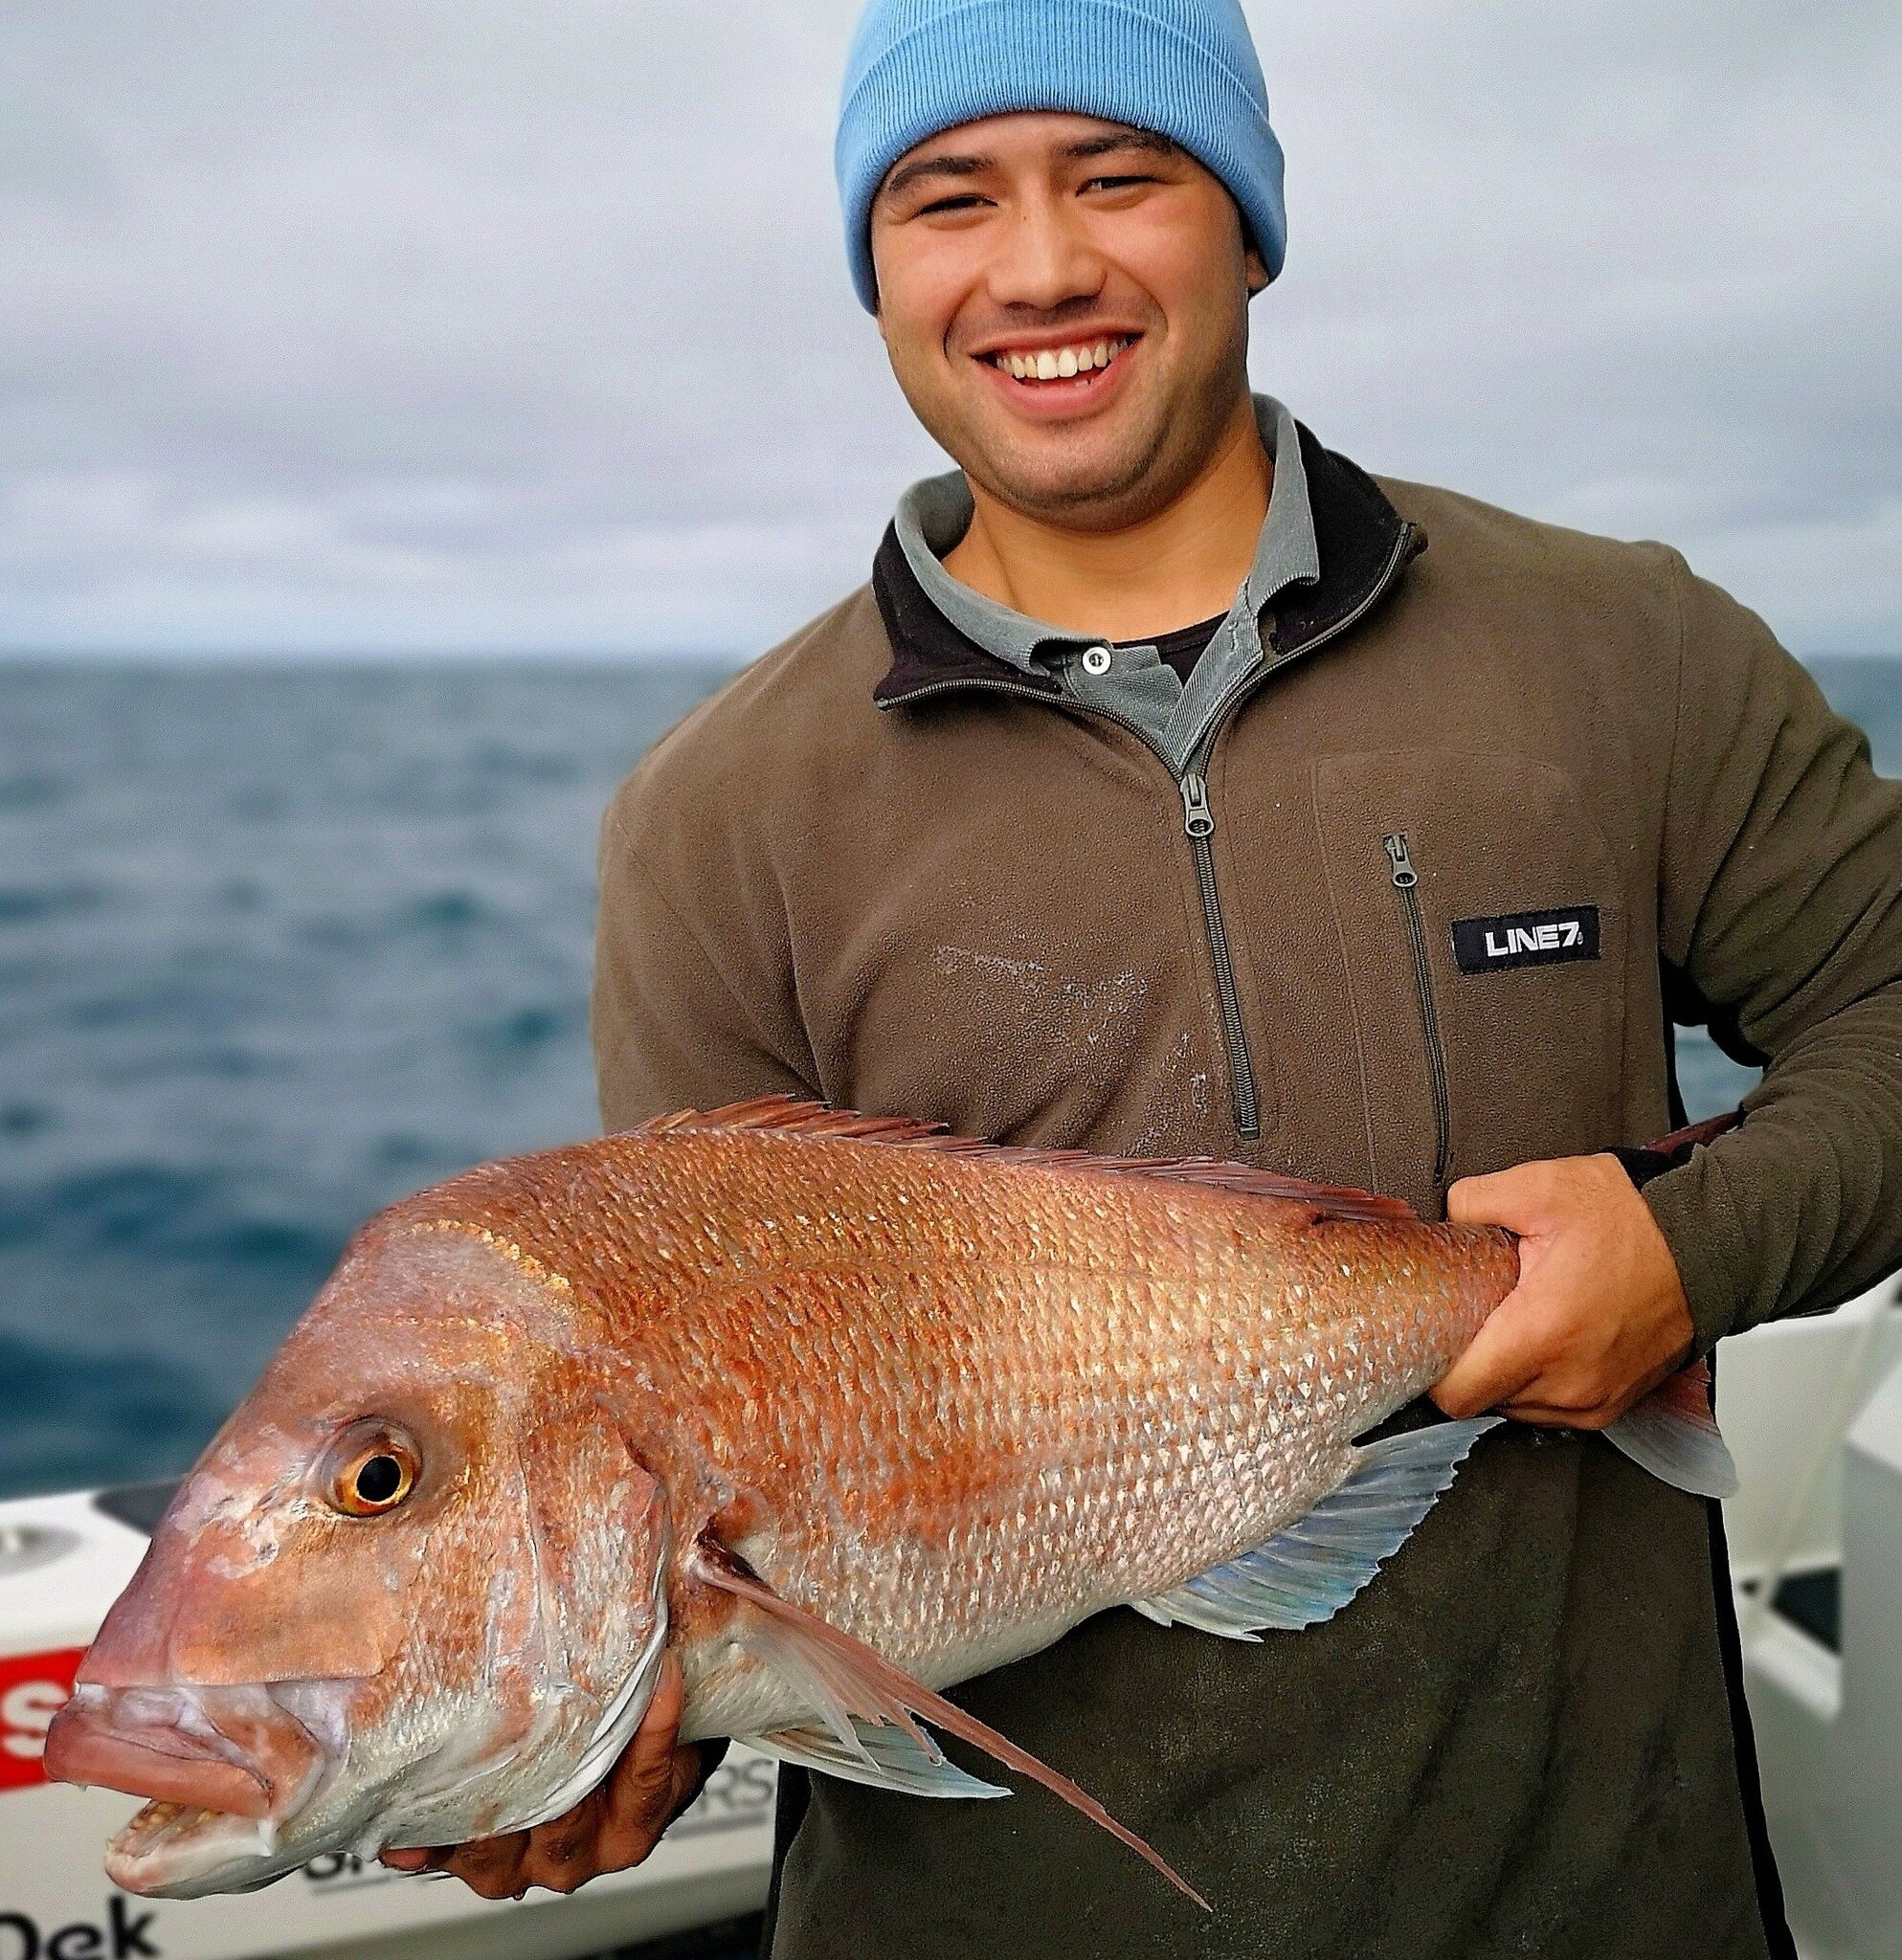 We all love dreamy 5kt variable conditions, but there is a lot to be said for a 'little' bit of wind and some overcast skies when it comes to the fishing heating up.

@okuma_nz 

#ultimatechartersnewzealand #ultimatecharters #fishingcharters #l#luref